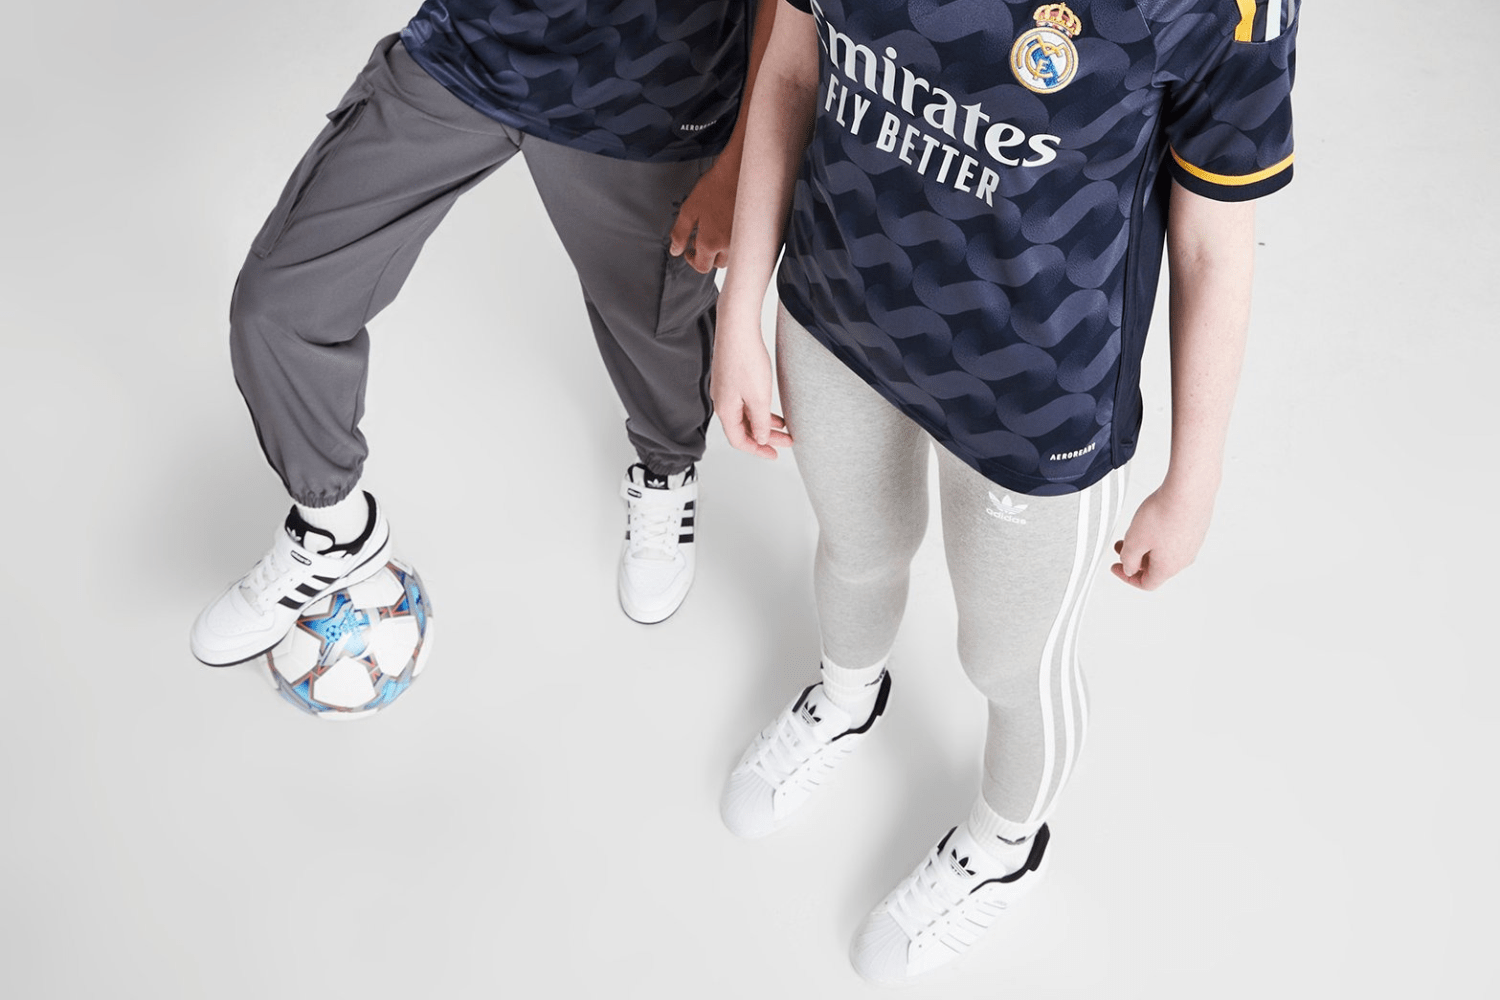 Here are some of the best football styles available at JD Sports